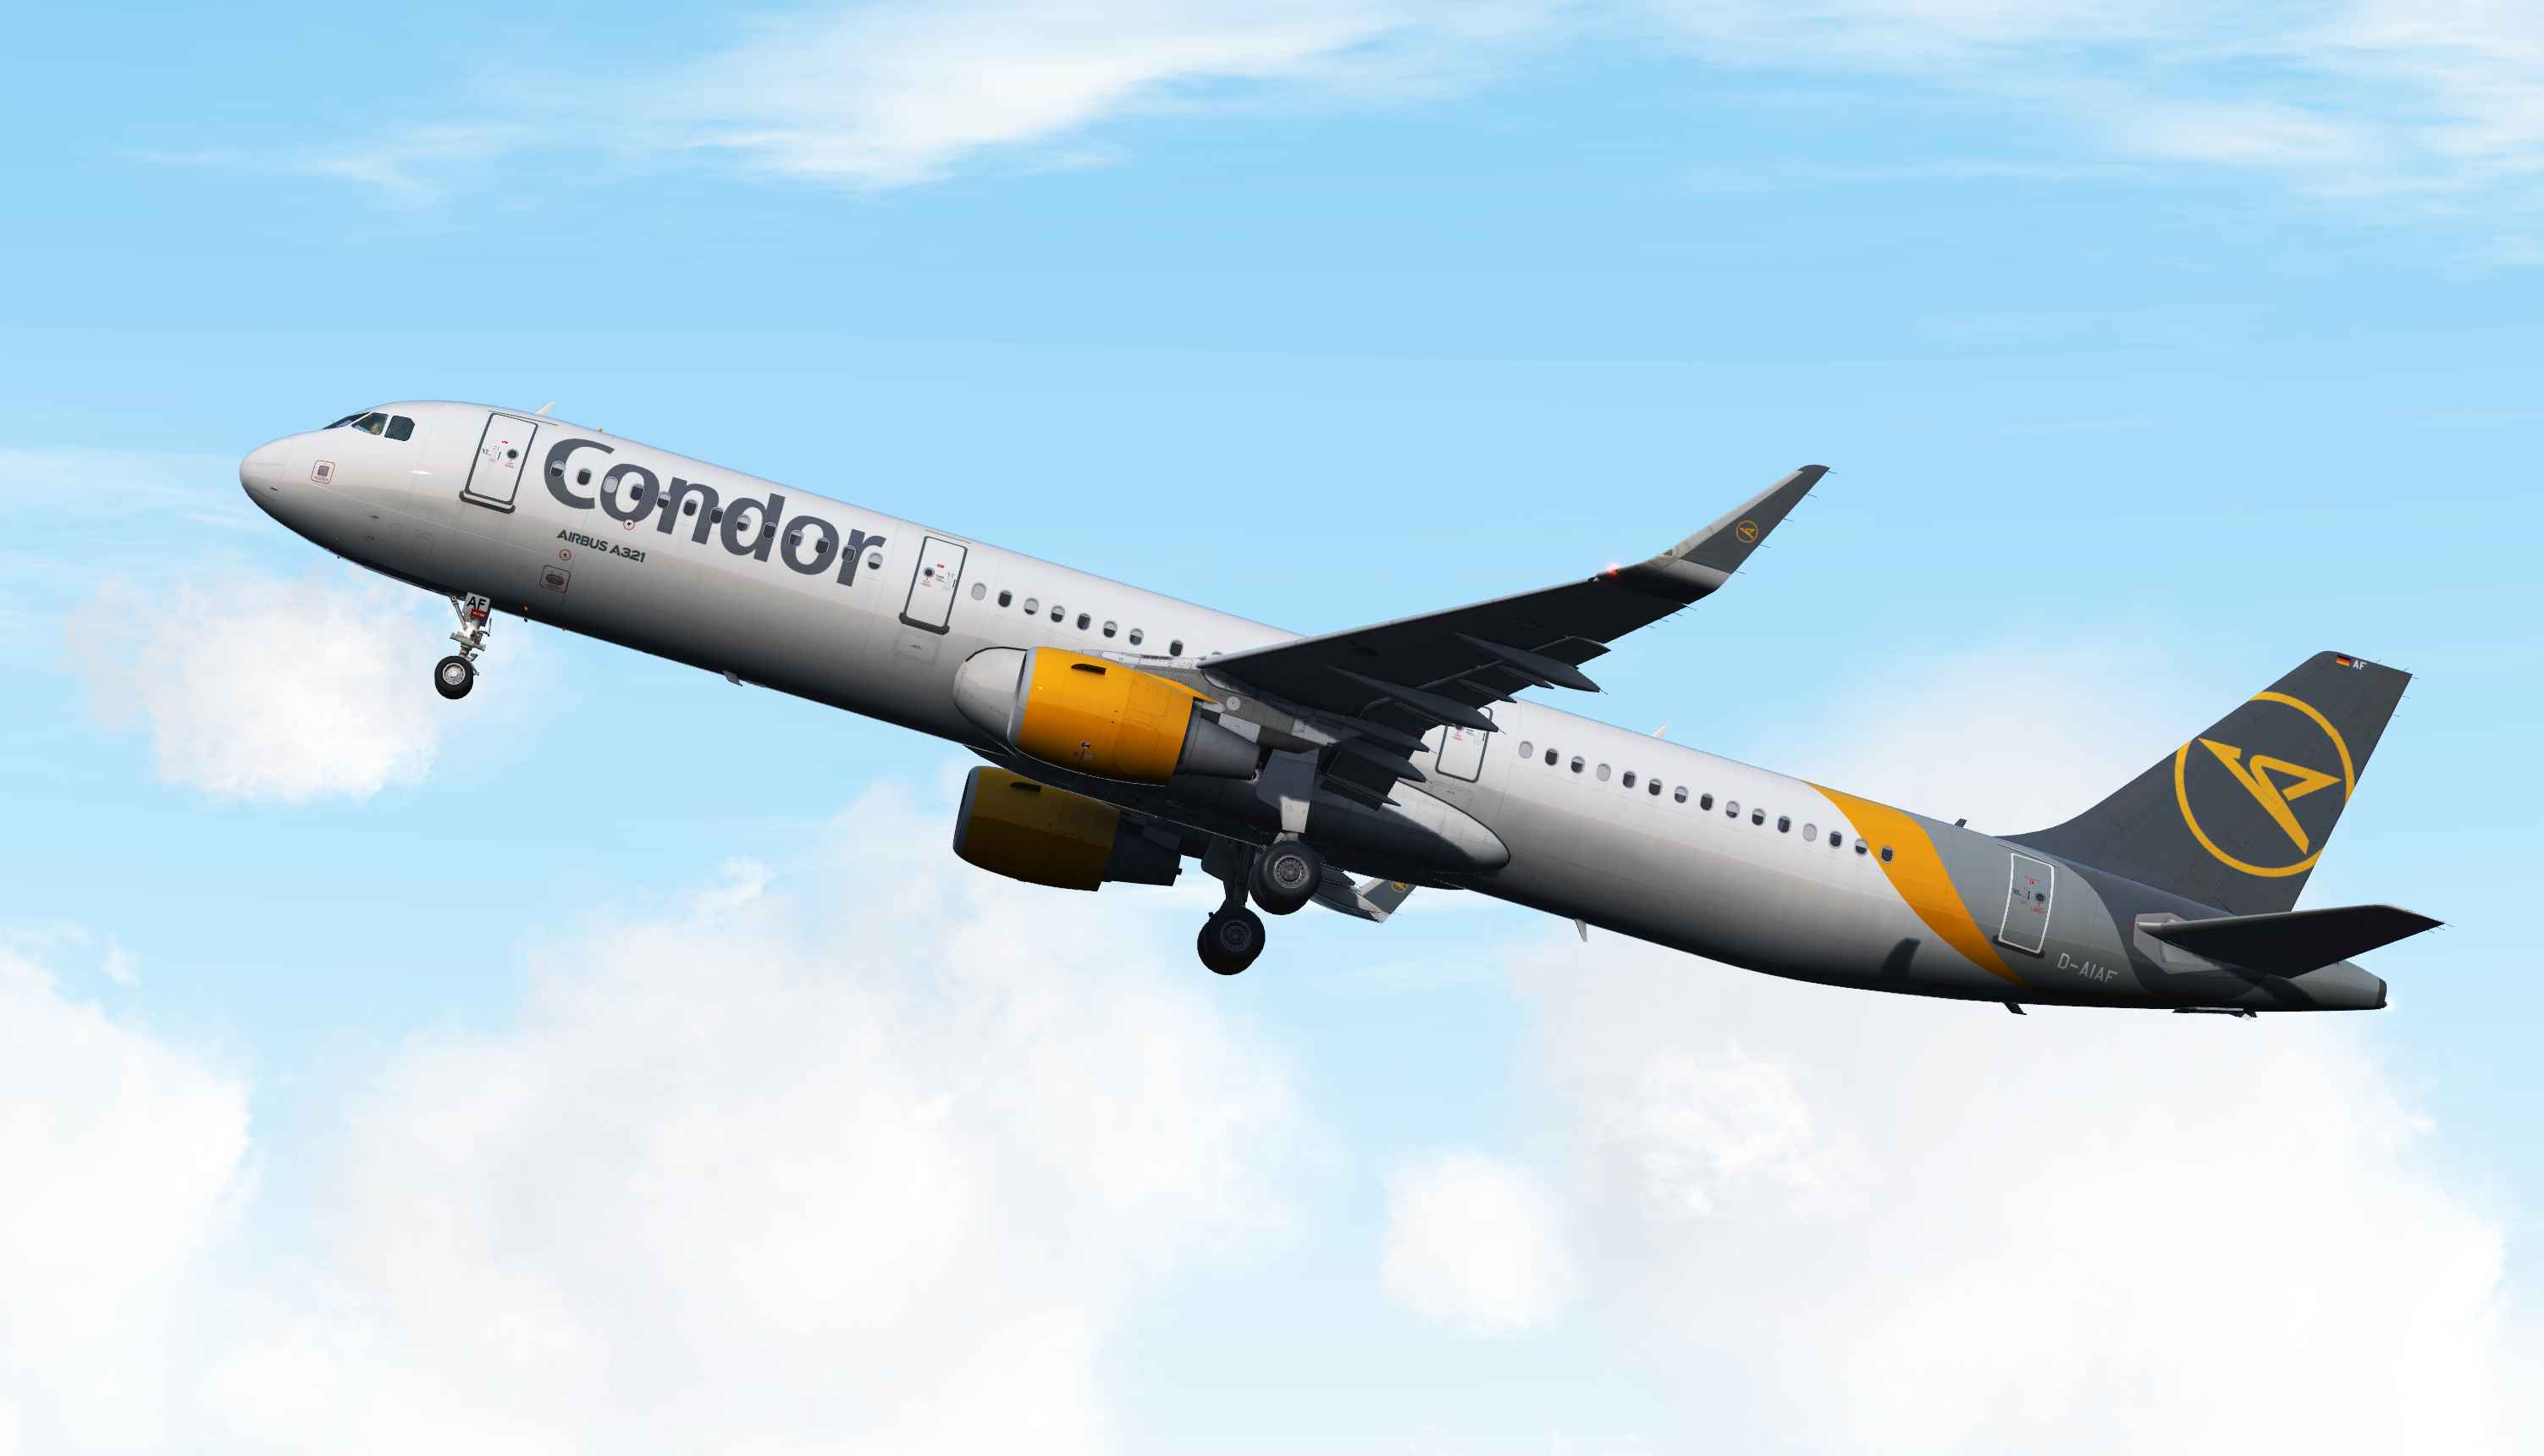 More information about "Condor 2020 D-AIAF"